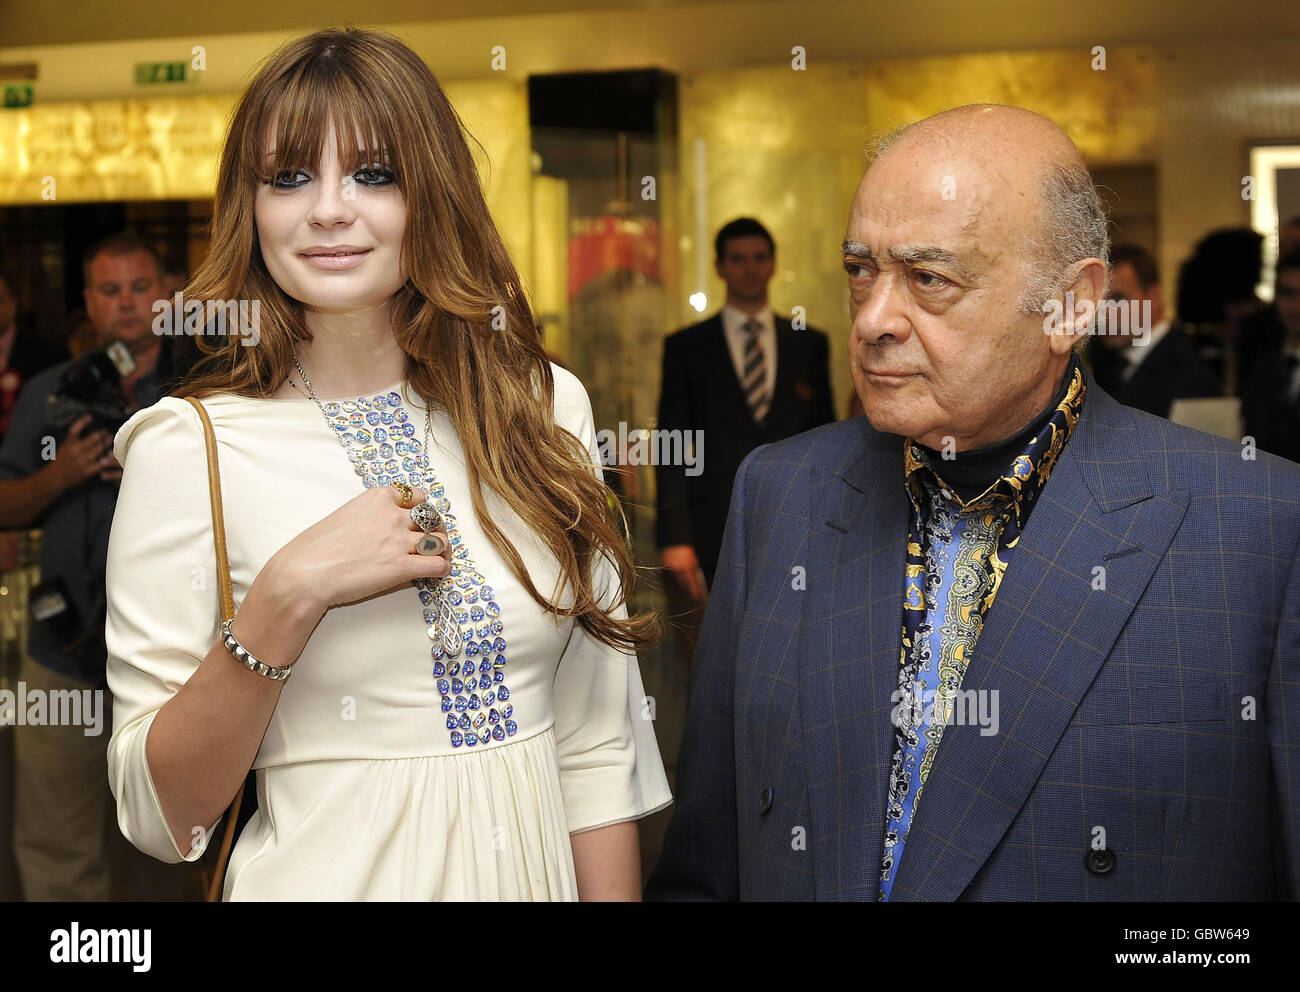 Actress Mischa Barton and Harrods boss Al Fayed attend the launch of the store's summer sale Stock Photo - Alamy